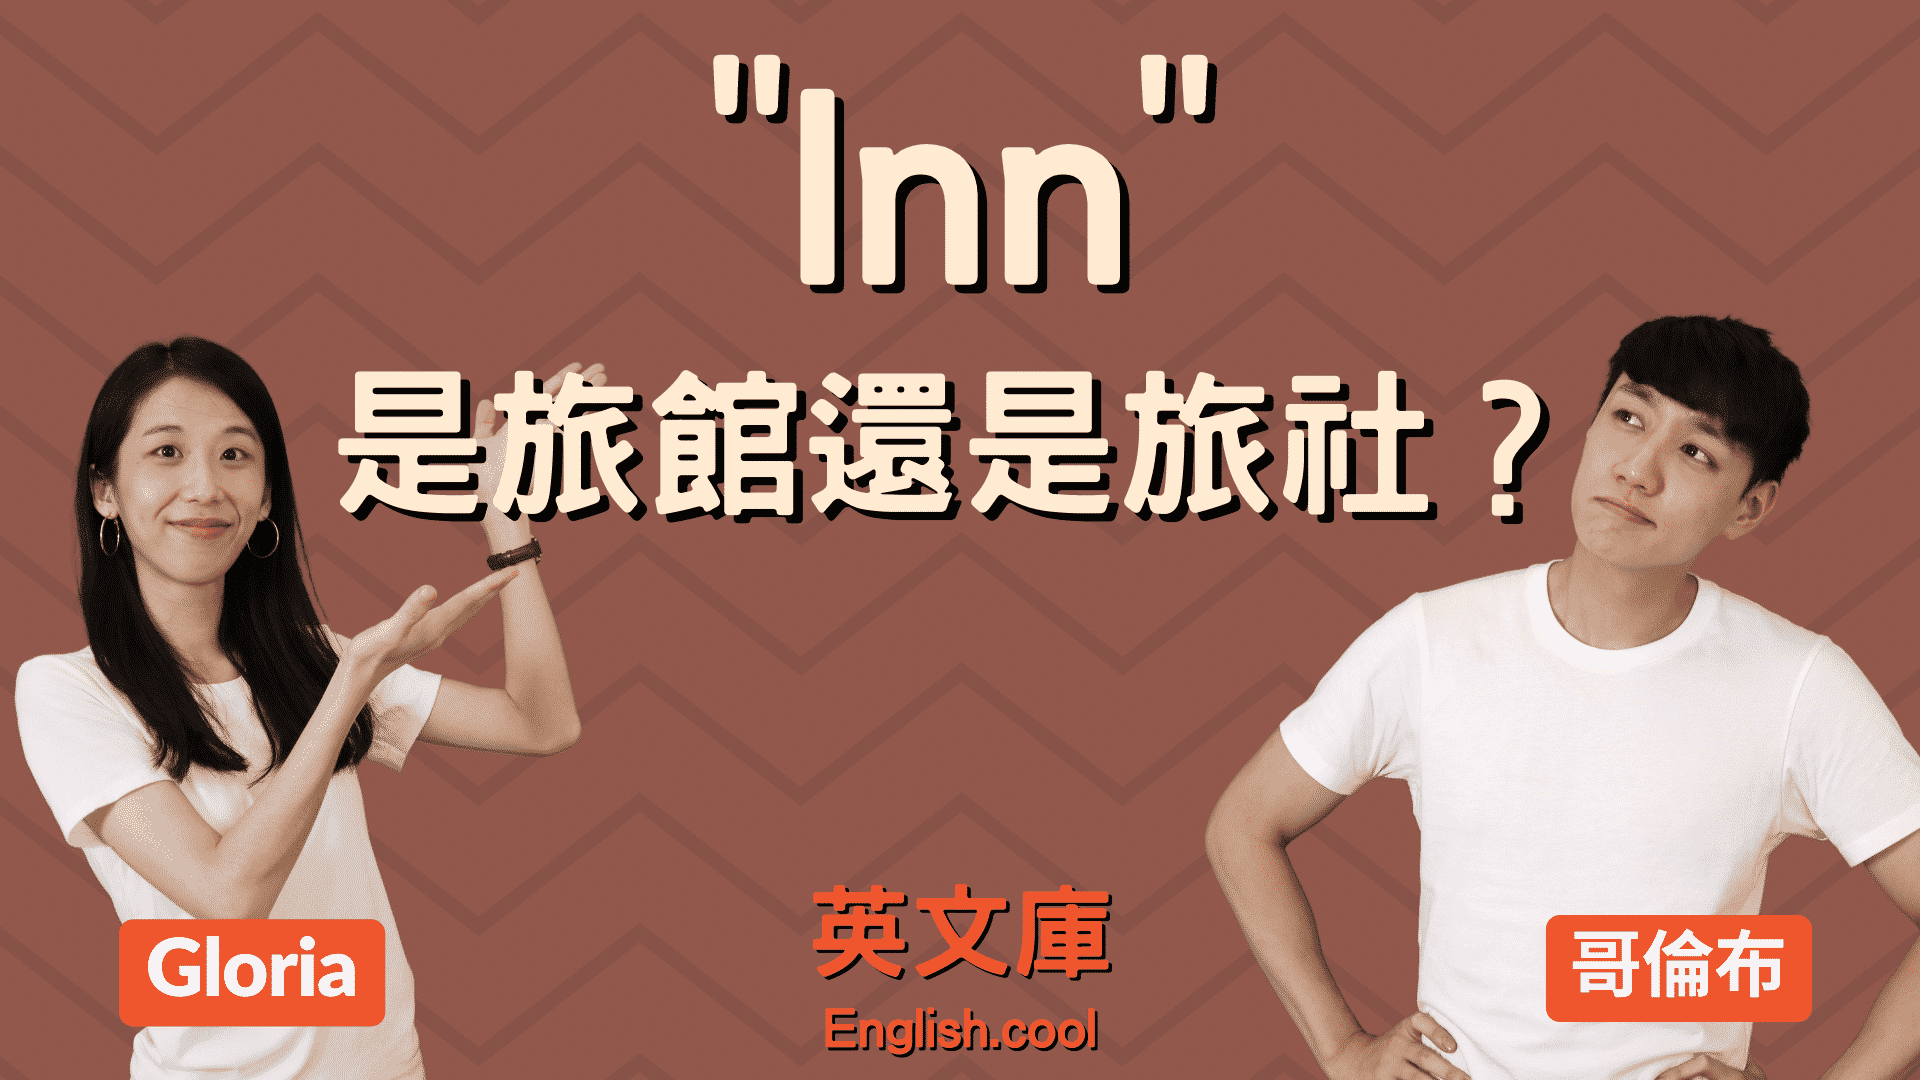 You are currently viewing Inn 到底是什麼？旅社嗎？旅館嗎？